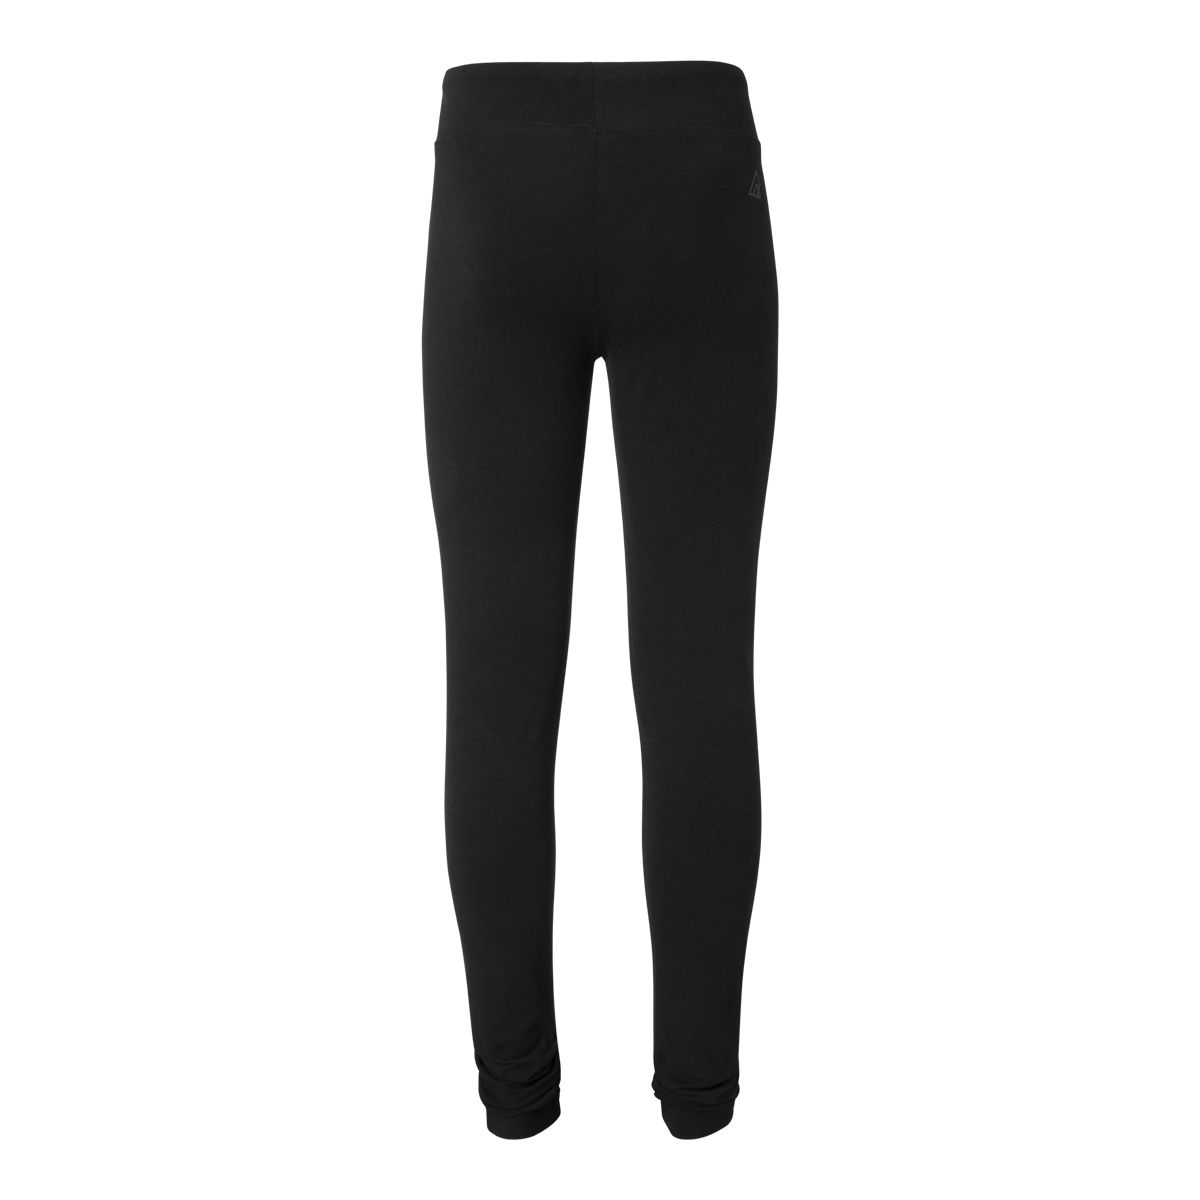 tight girls leggings, tight girls leggings Suppliers and